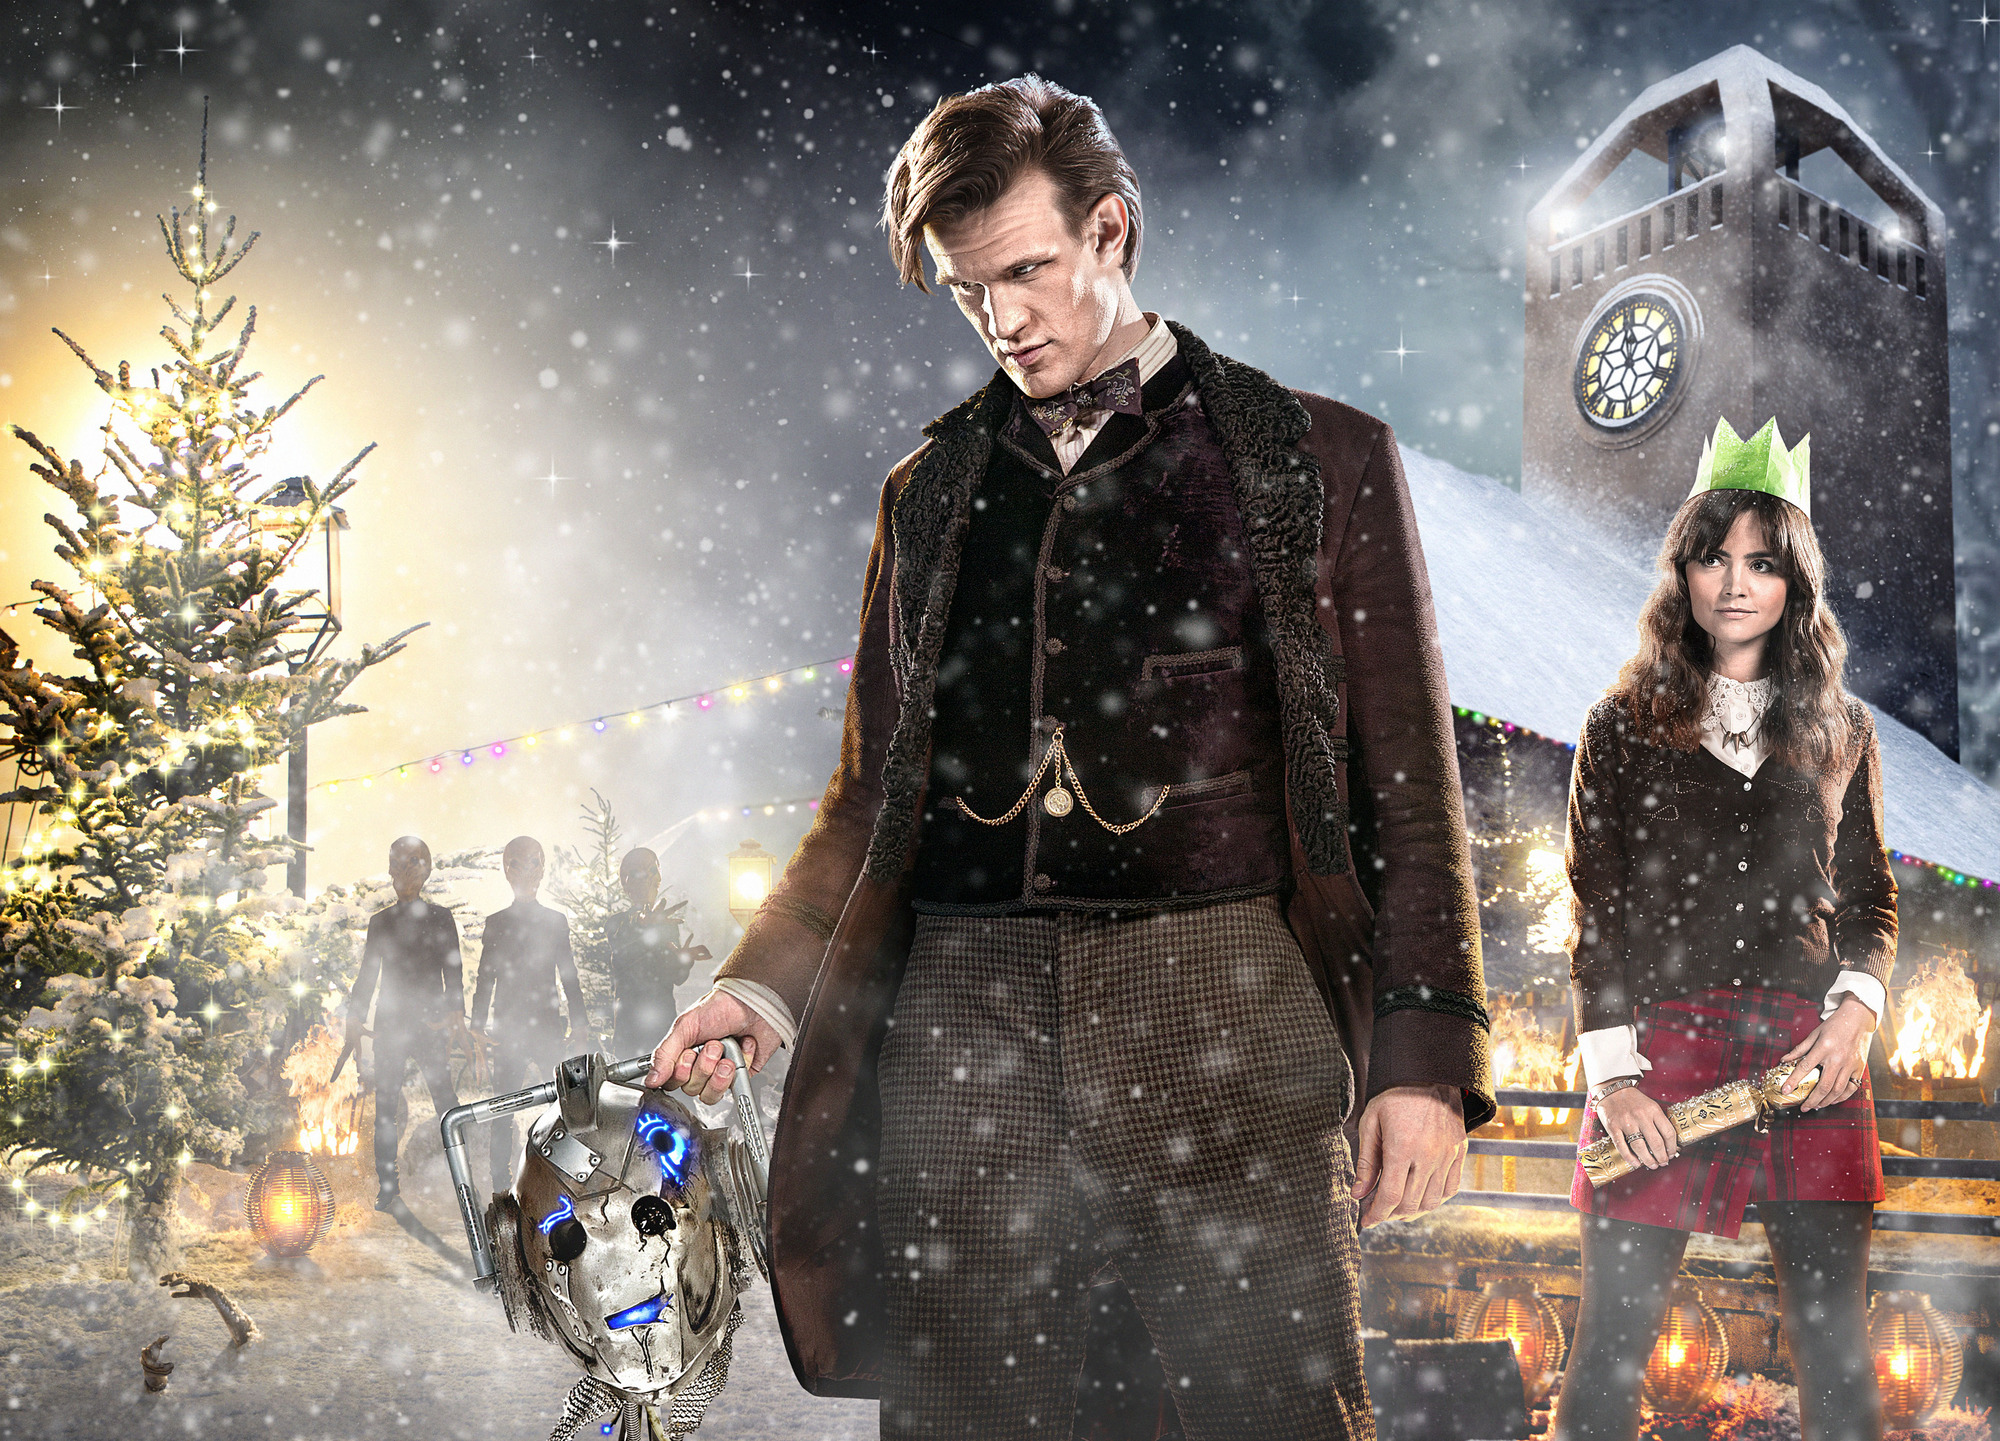 Promotional image for a Doctor Who christmas special featuring Matt Smith and Jenna Coleman